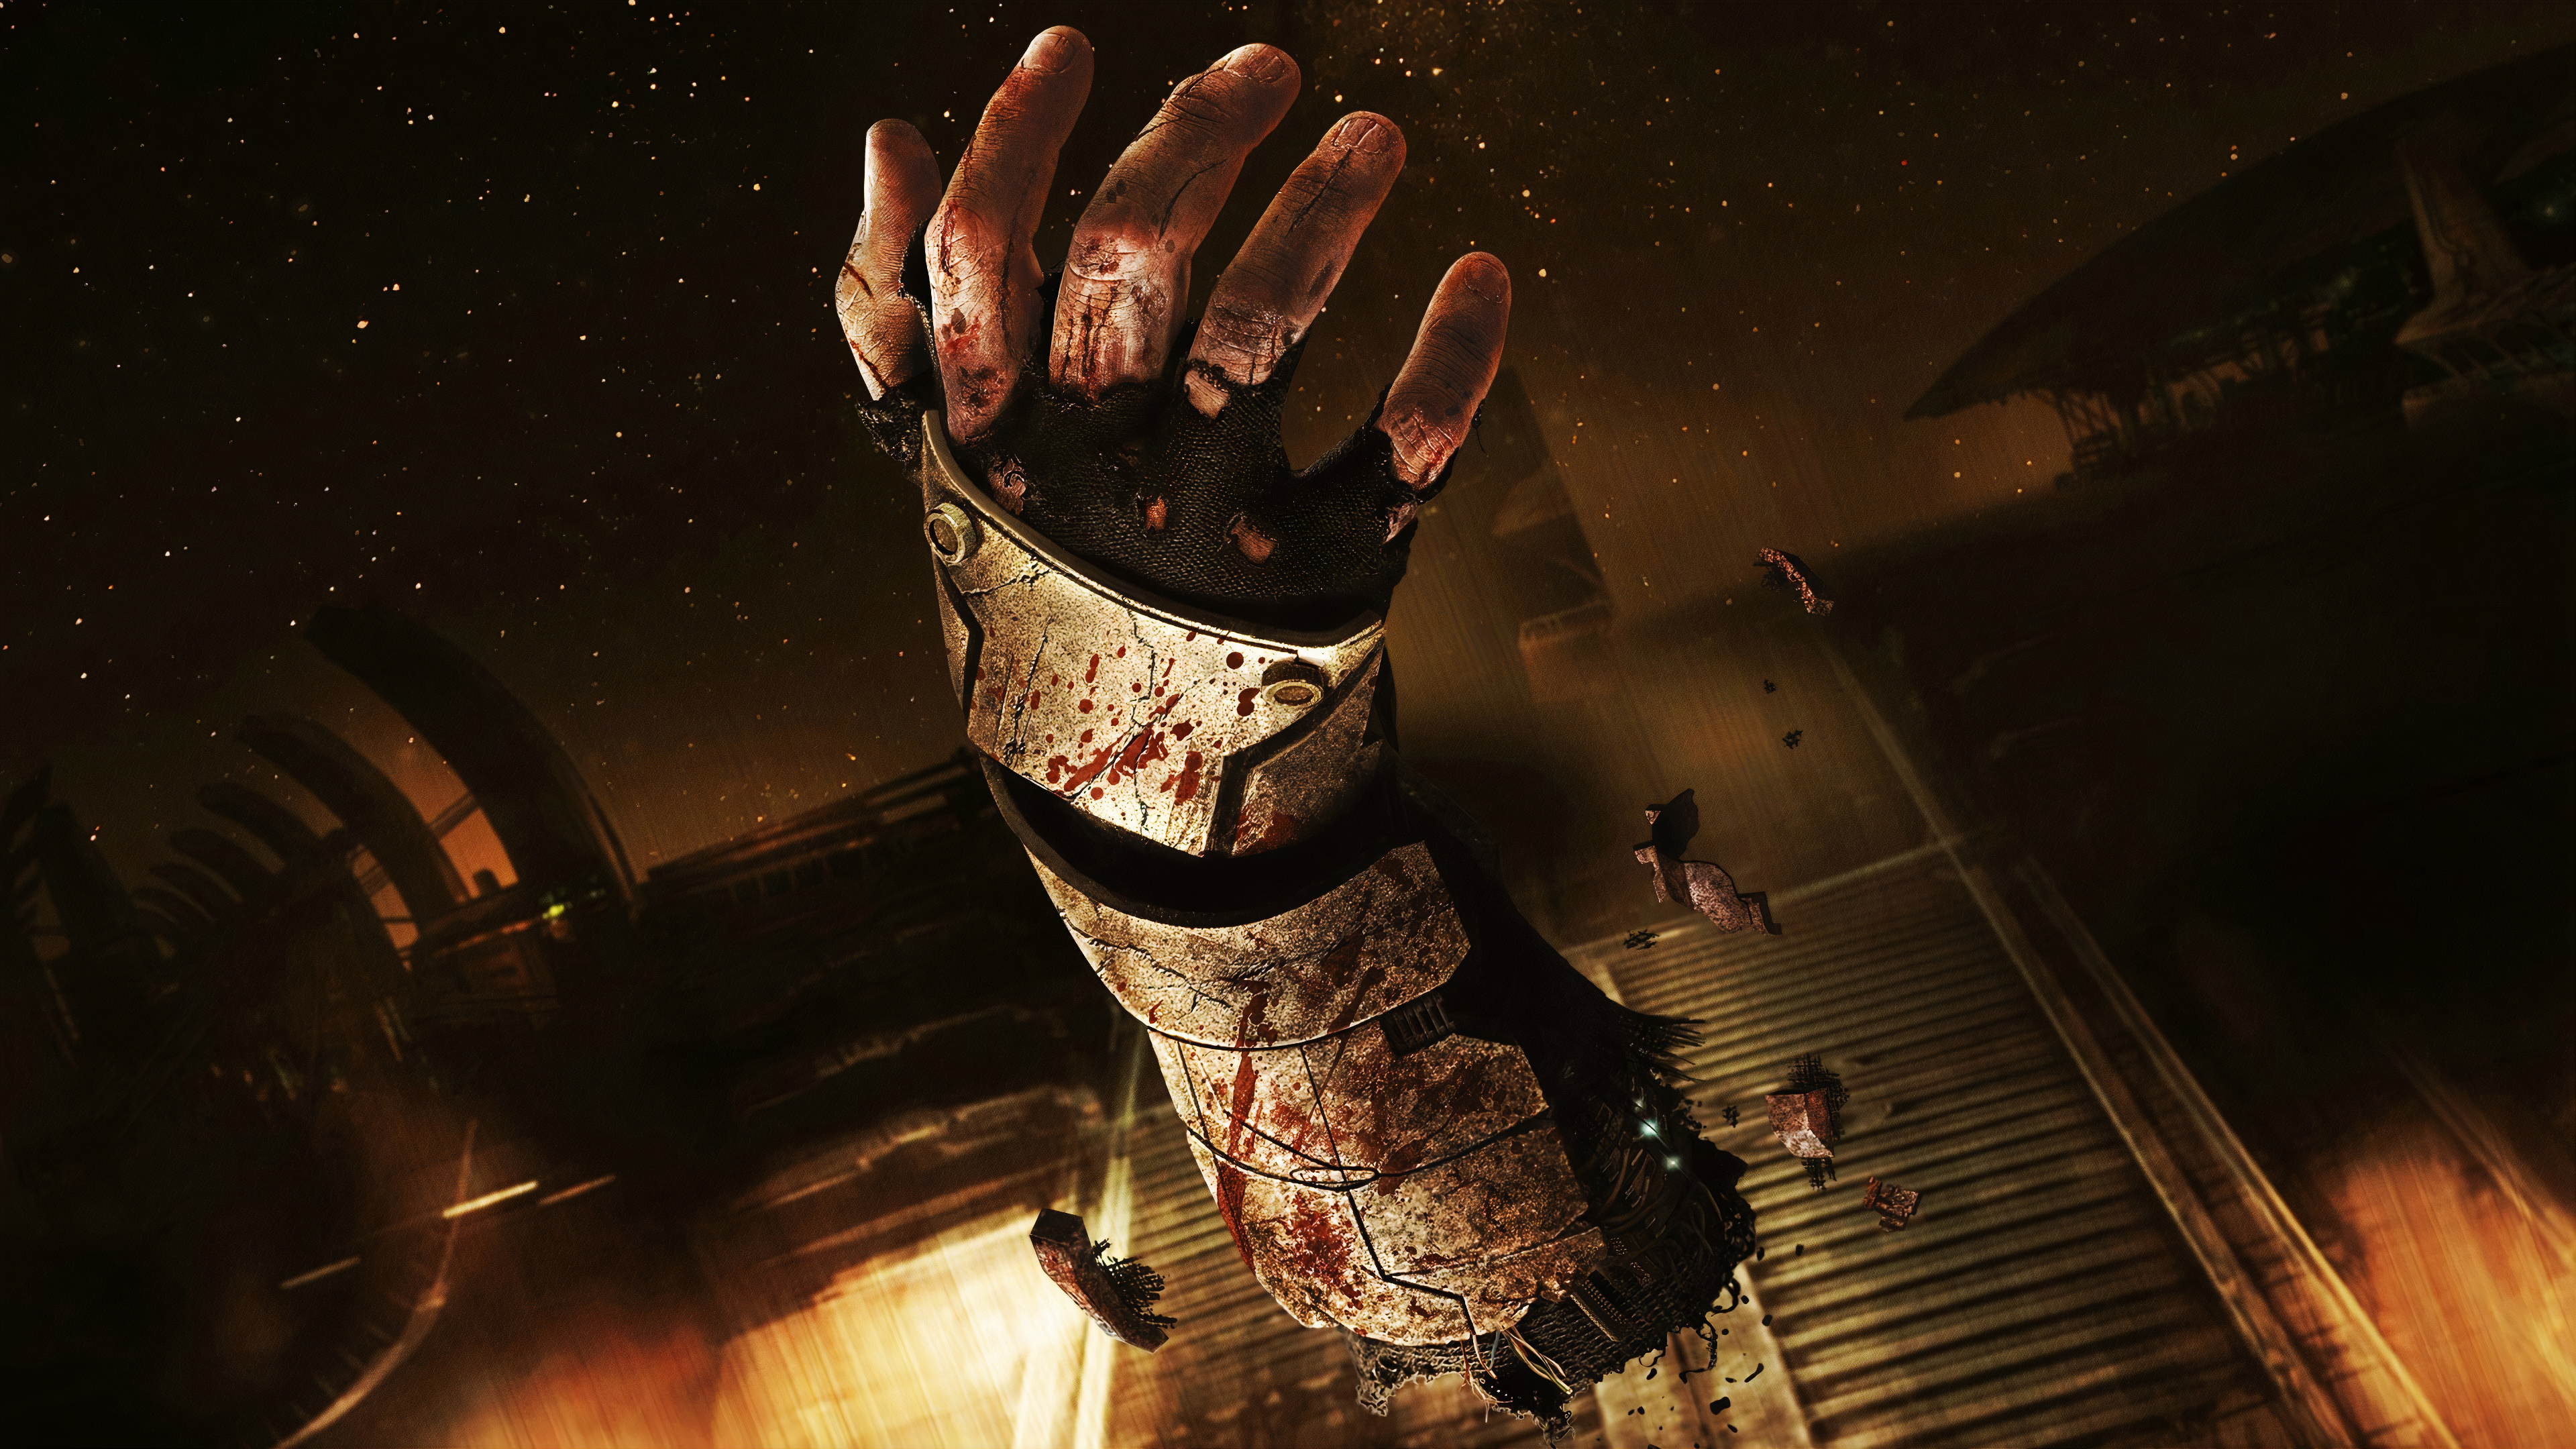 Dead Space HD Wallpaper and Background